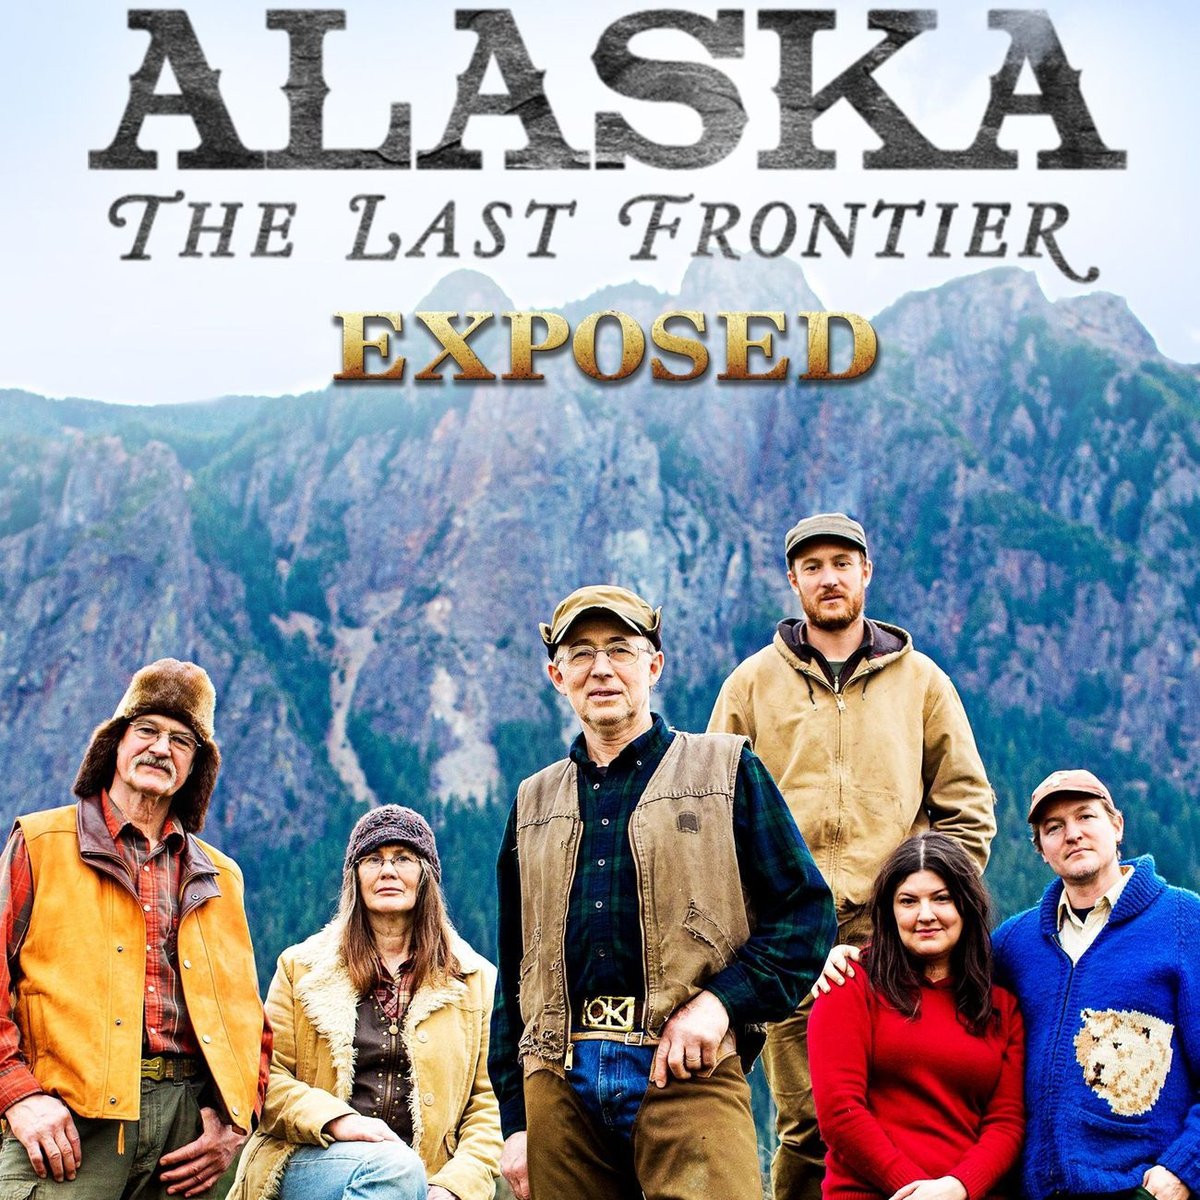 Alaska: The Last Frontier popularity & fame | YouGov